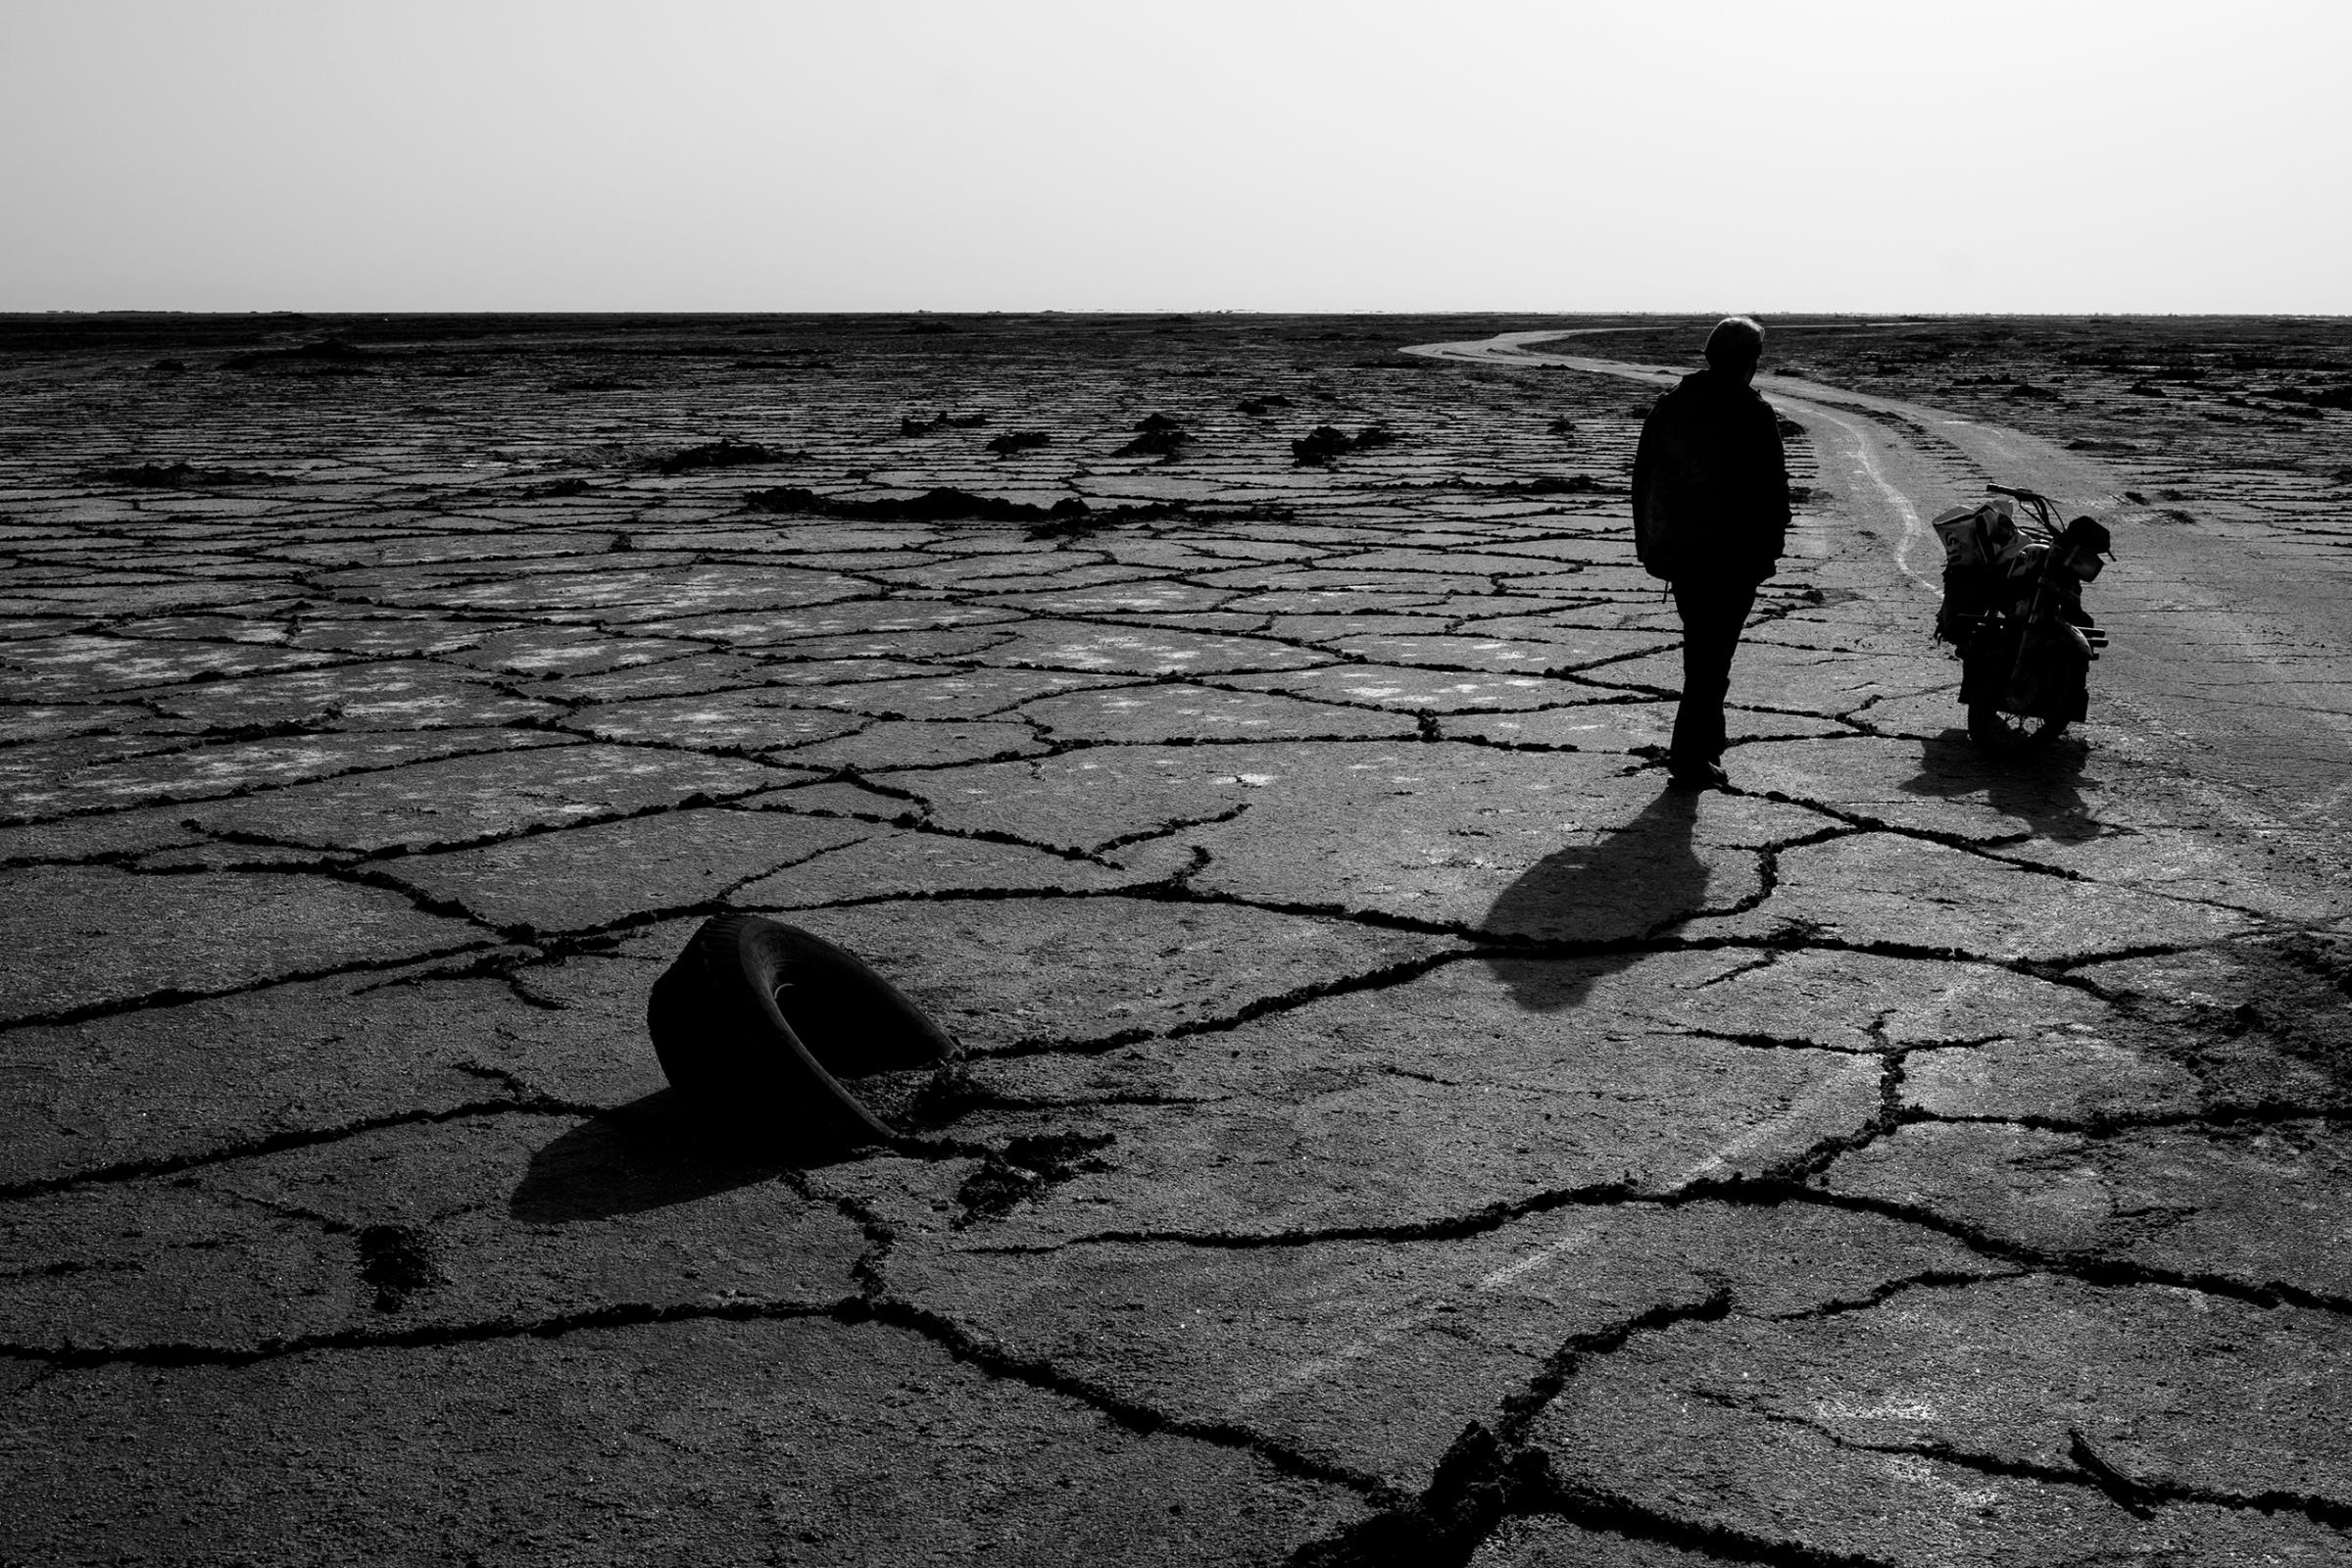 Cracked land of the Gavkhouni salt marsh, the terminal basin of the Zayandeh River in Isfahan Province, Iran. Droughts and water mismanagement have contributed to Iran's water crisis, May 2016.